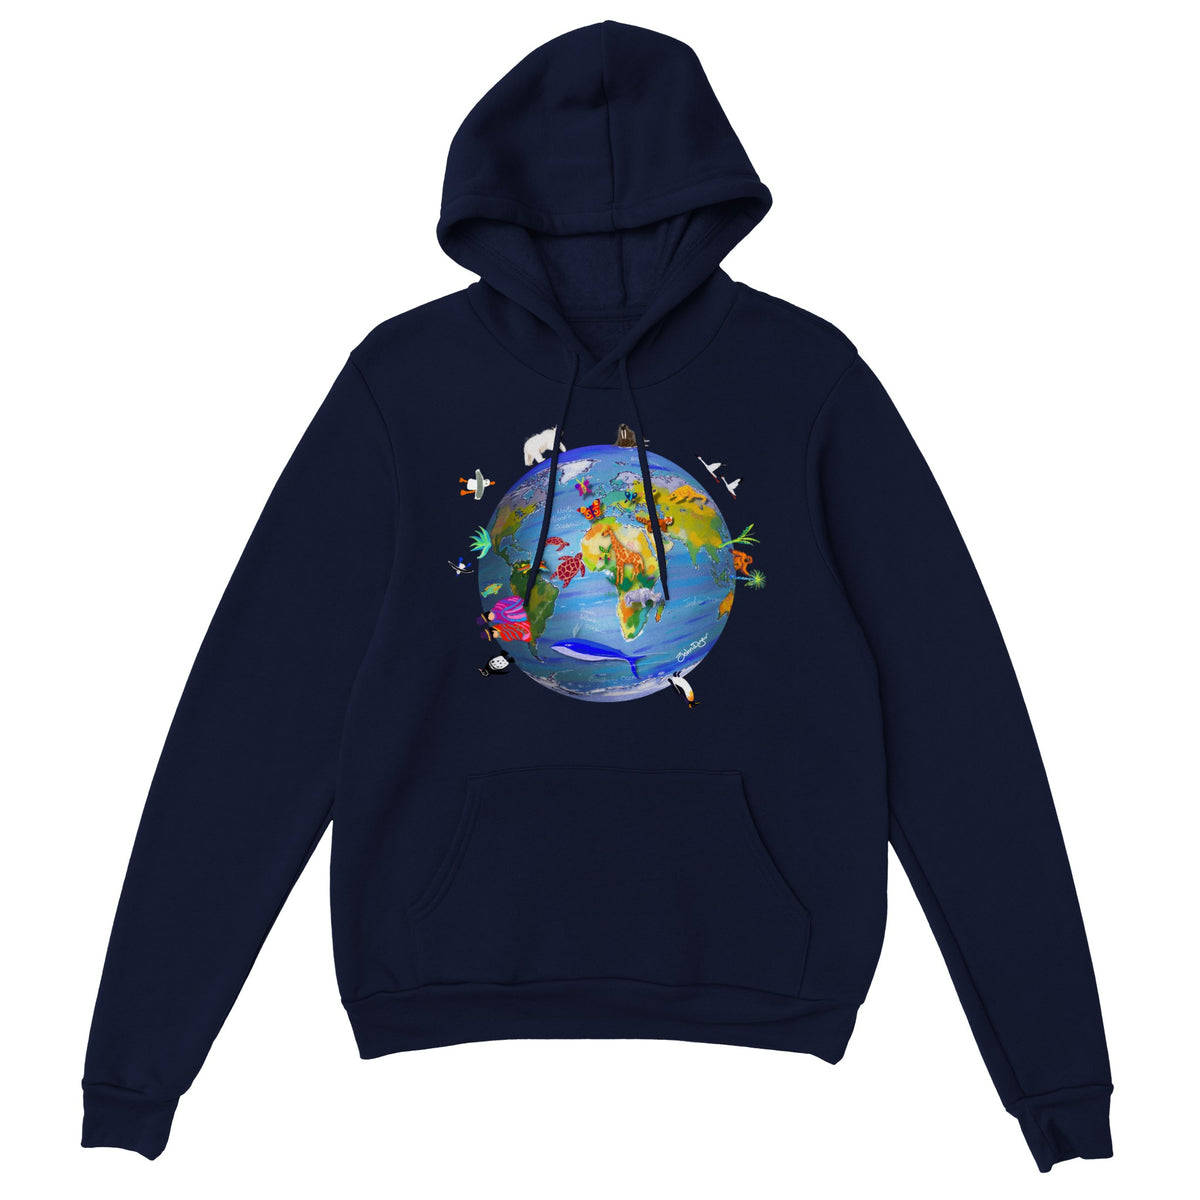 John Dyer designed &#39;Last Chance To Paint&#39; Climate Change Earth Design Classic Unisex Pullover HoodieJohn Dyer designed &#39;Last Chance To Paint&#39; Wildlife &amp; Climate Change Earth Design Classic Unisex Pullover Hoodie